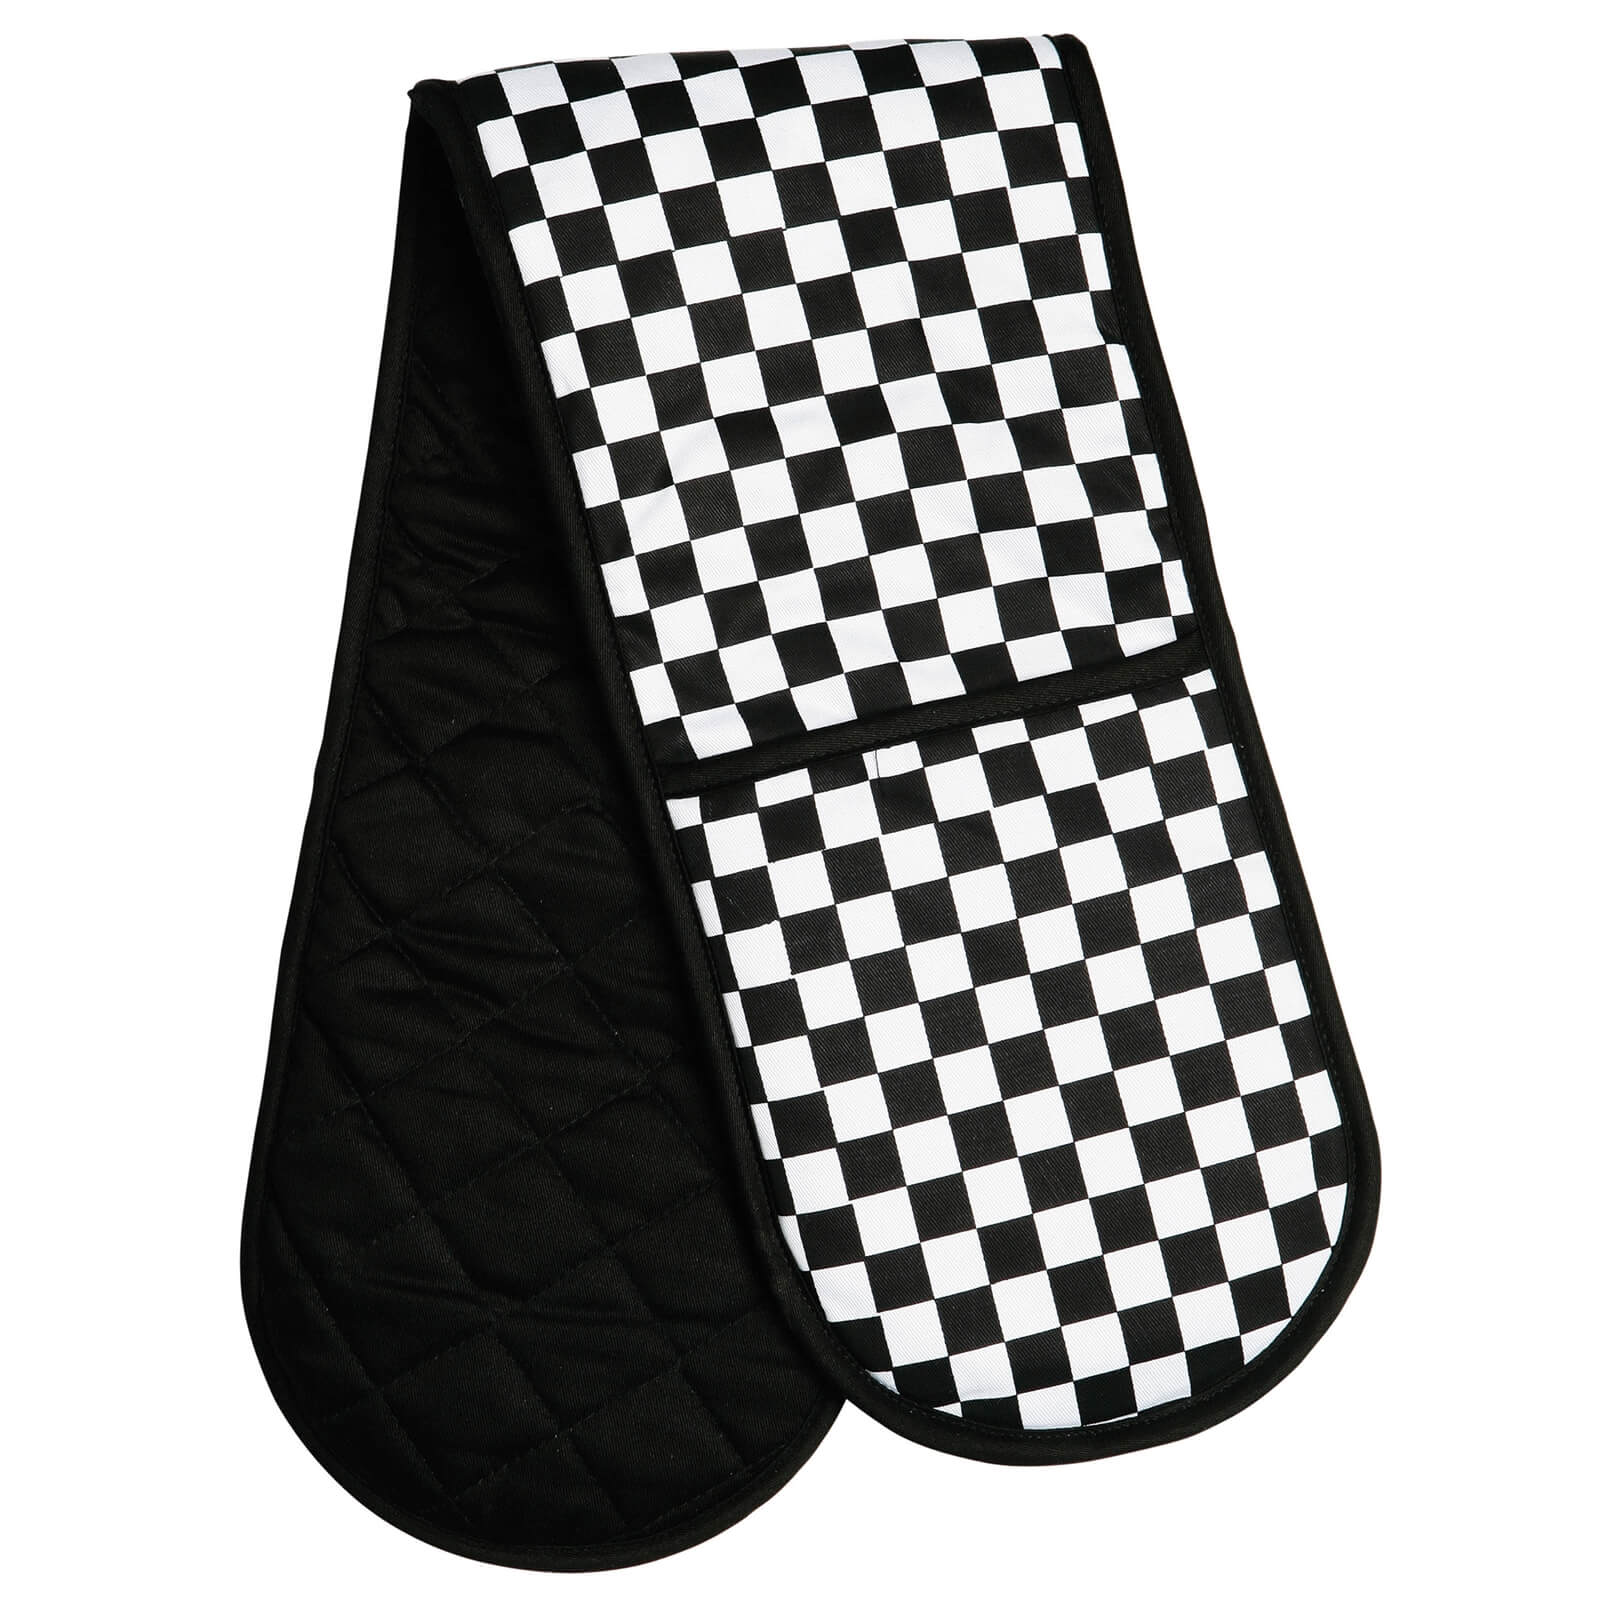 Check Mate Double Oven Glove